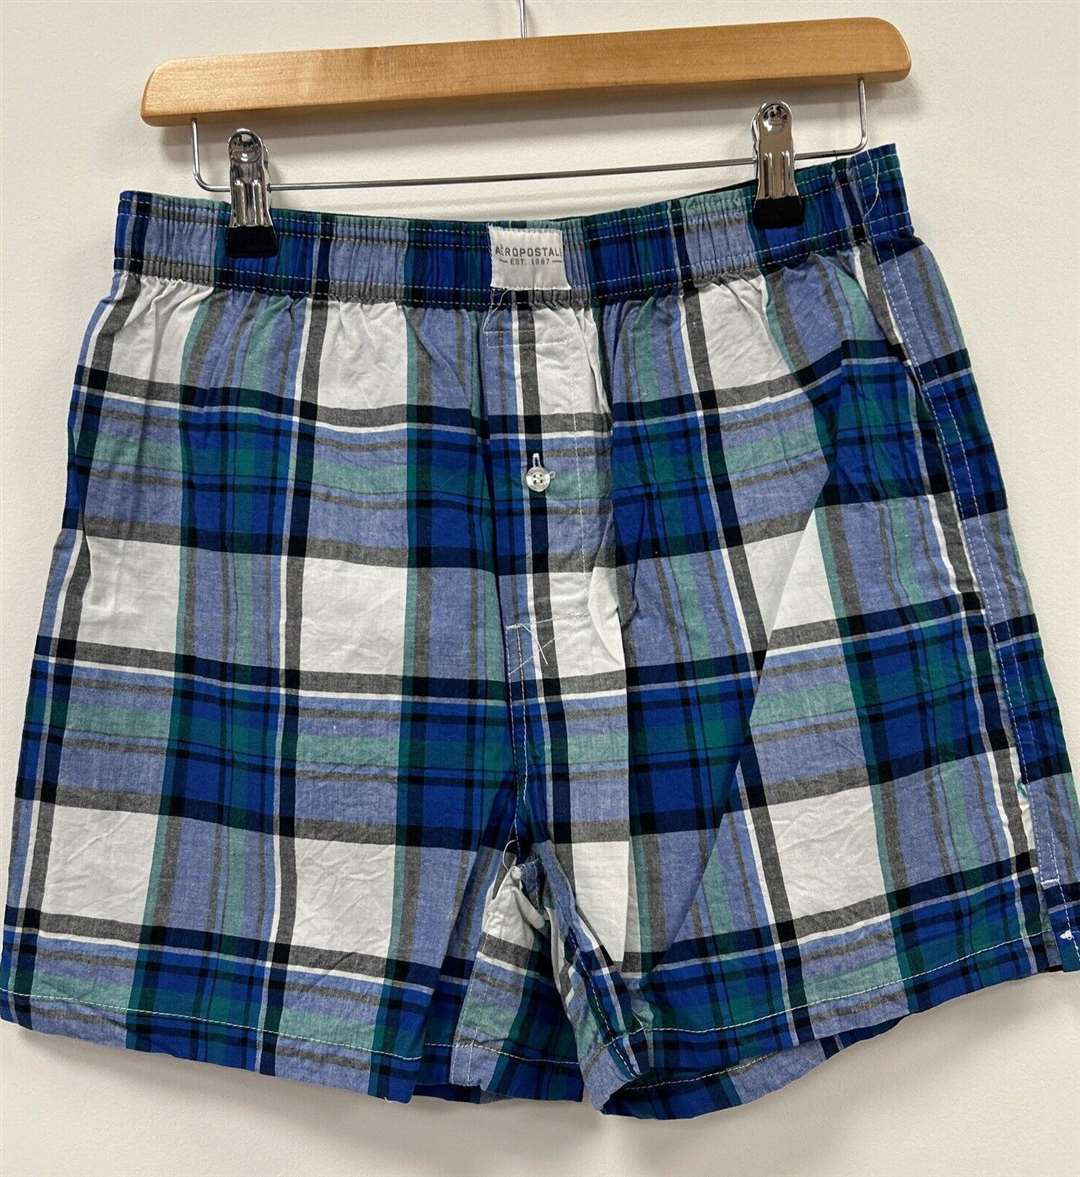 A pair of boxer shorts owned by Sheeran, being auctioned by EACH. Picture: EACH